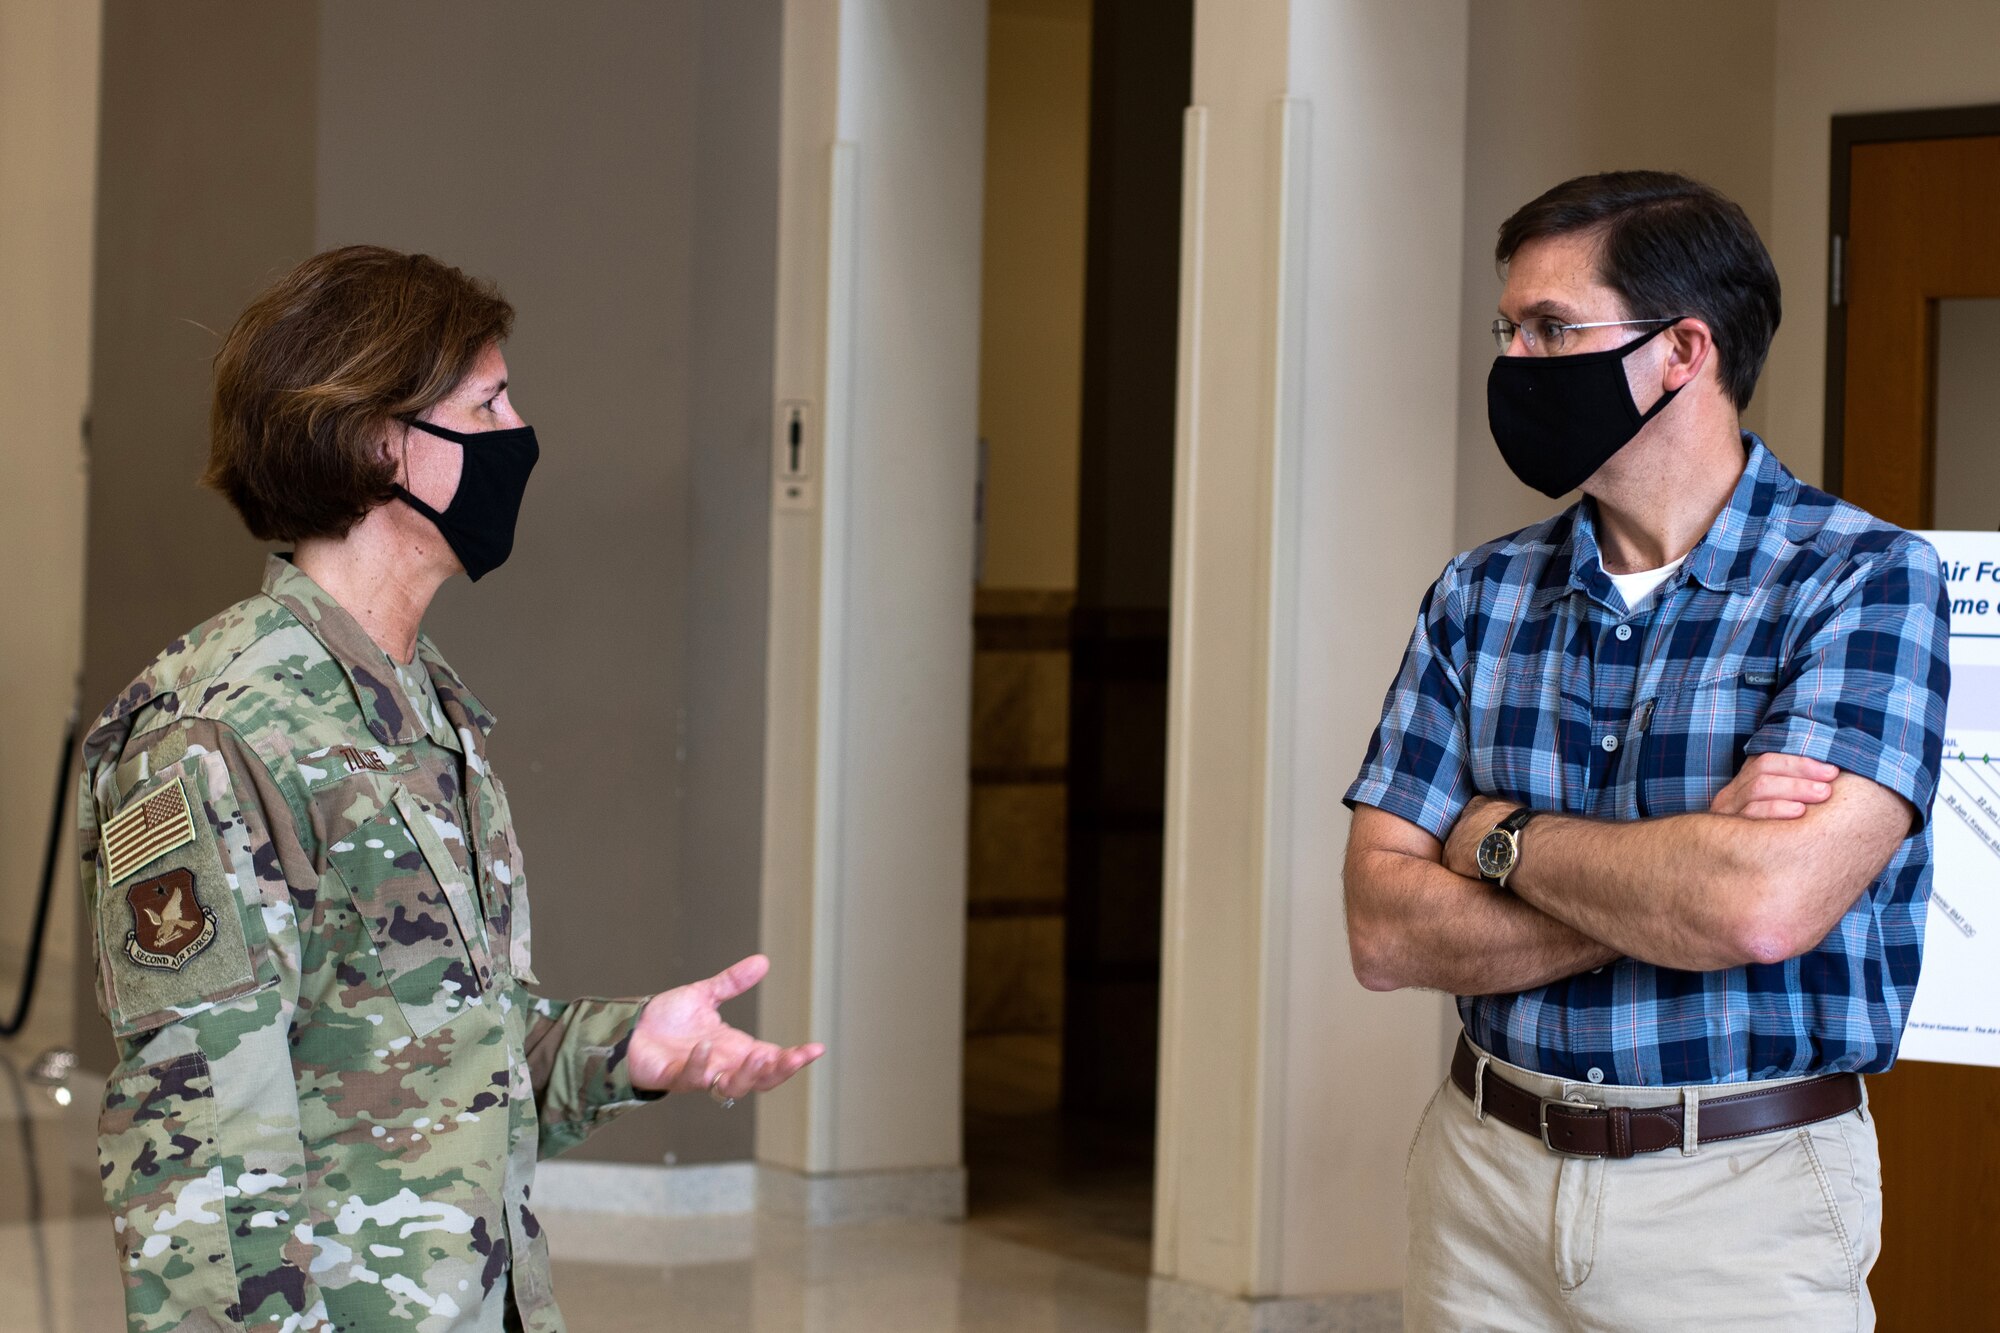 U.S. Air Force Maj. Gen. Andrea Tullos (left), 2nd Air Force commander, briefs Defense Secretary Dr. Mark T. Esper (right), during a tour of the Pfingston Reception Center June 16, 2020, at Joint Base San Antonio-Lackland, Texas. Esper met with AETC leaders to see firsthand how Basic Military Training is fighting through COVID-19 with health protection measures in place and adapting operations to current Centers for Disease Control and Prevention Guidance. The visit also allowed him to witness how a citizen becomes an Airman during COVID-19. (U.S. Air Force photo by Sarayuth Pinthong)